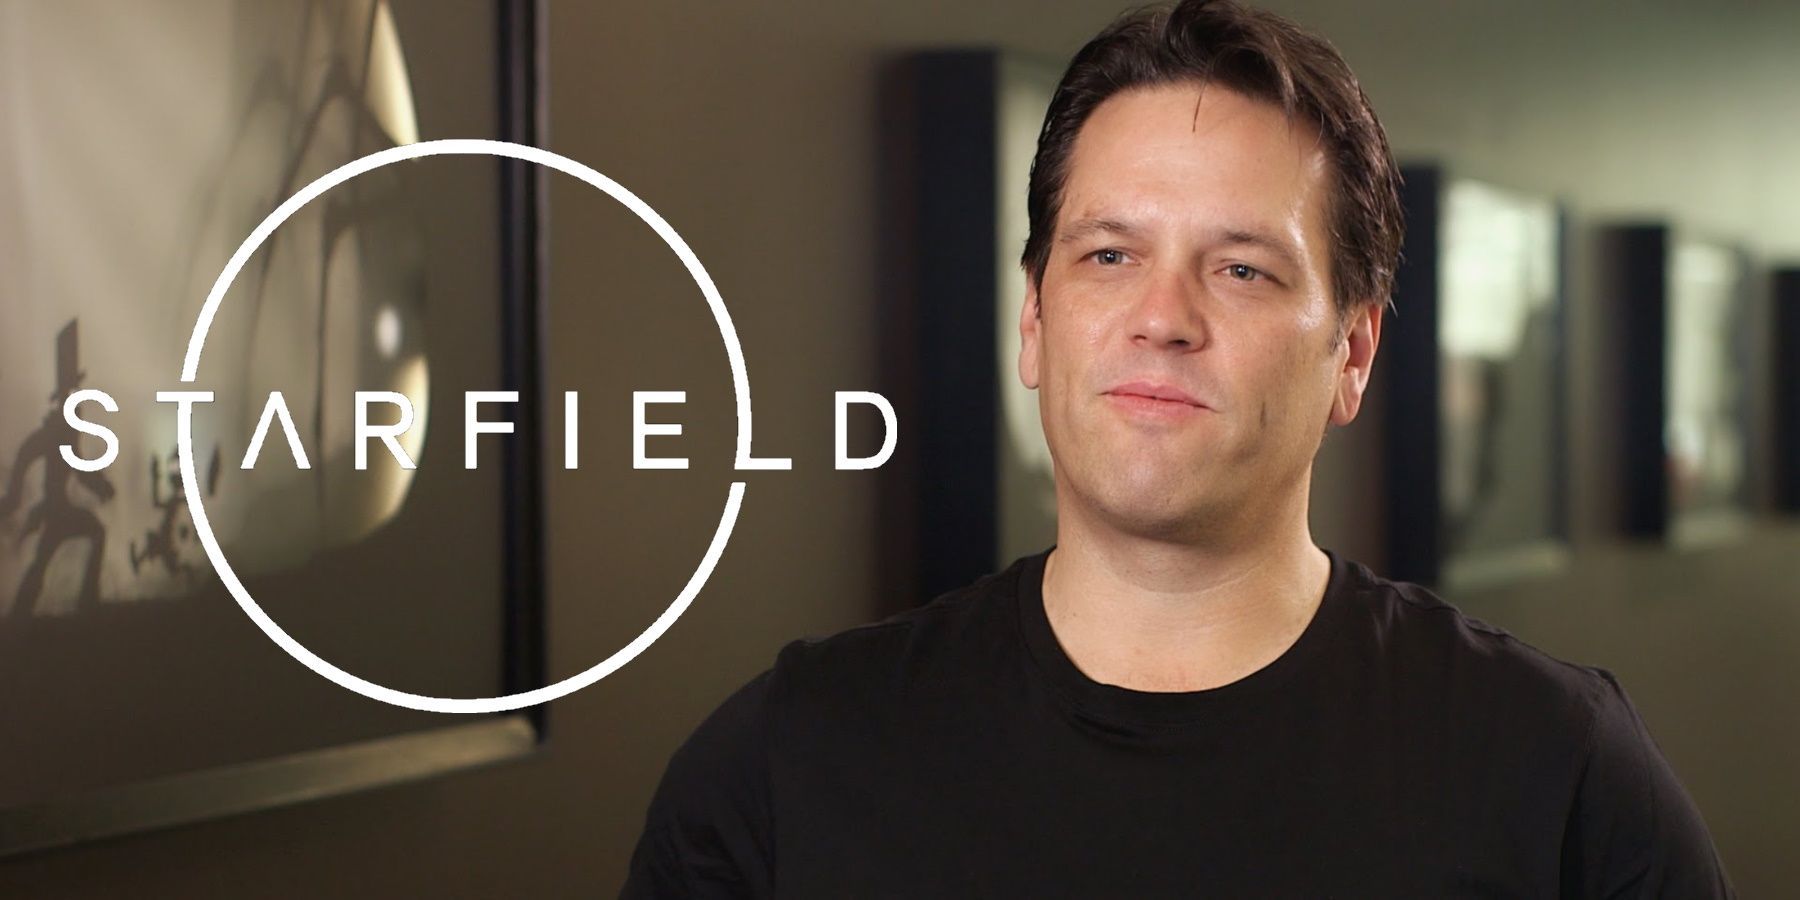 Starfield mods let Phil Spencer and Todd Howard be a light in dark